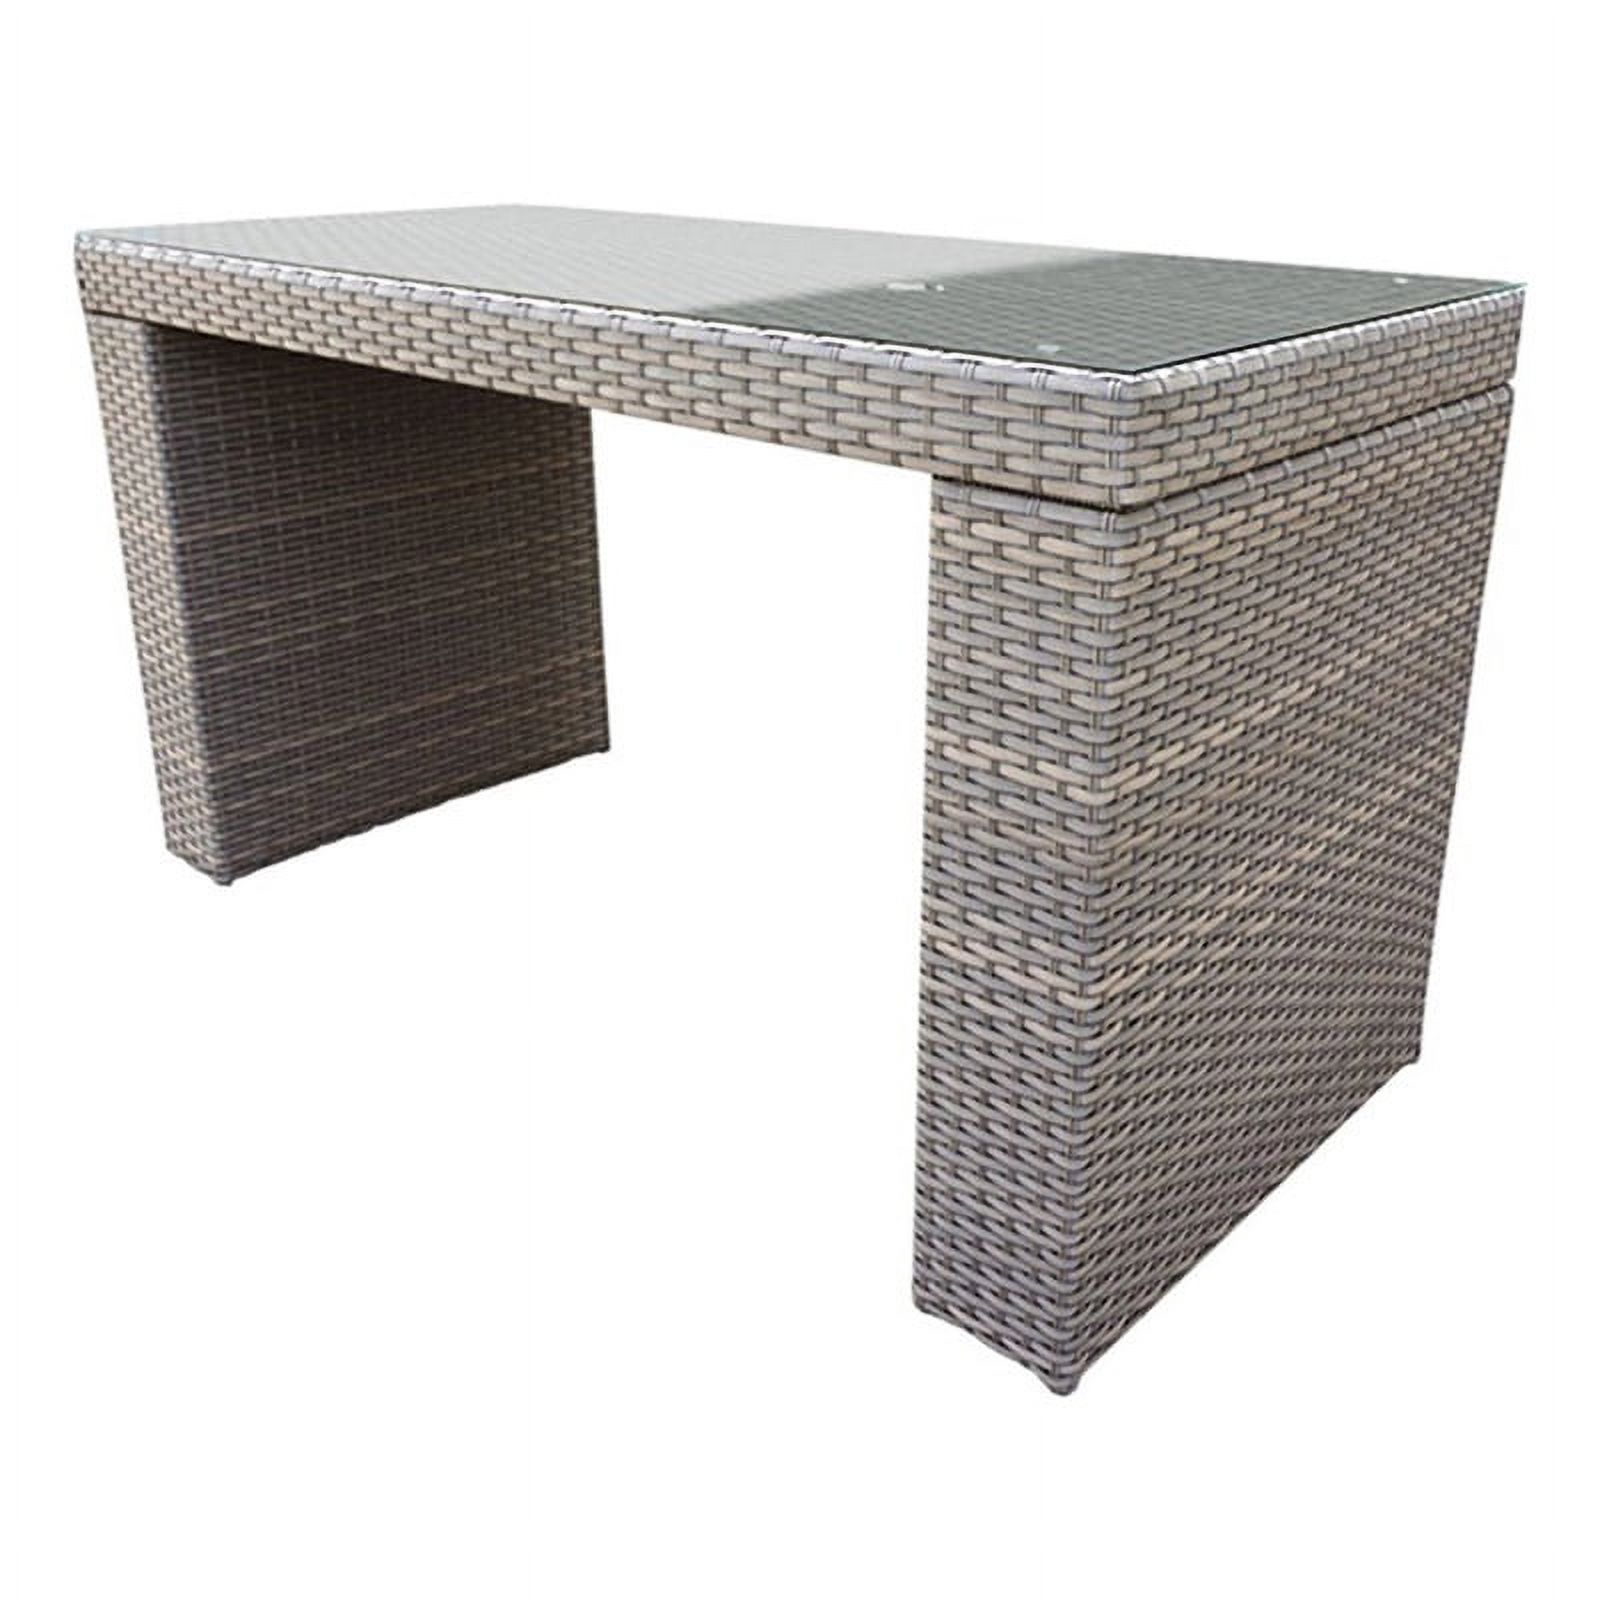 Bowery Hill Wicker / Rattan/Glass Patio Pub Table in Gray Stone - image 1 of 1